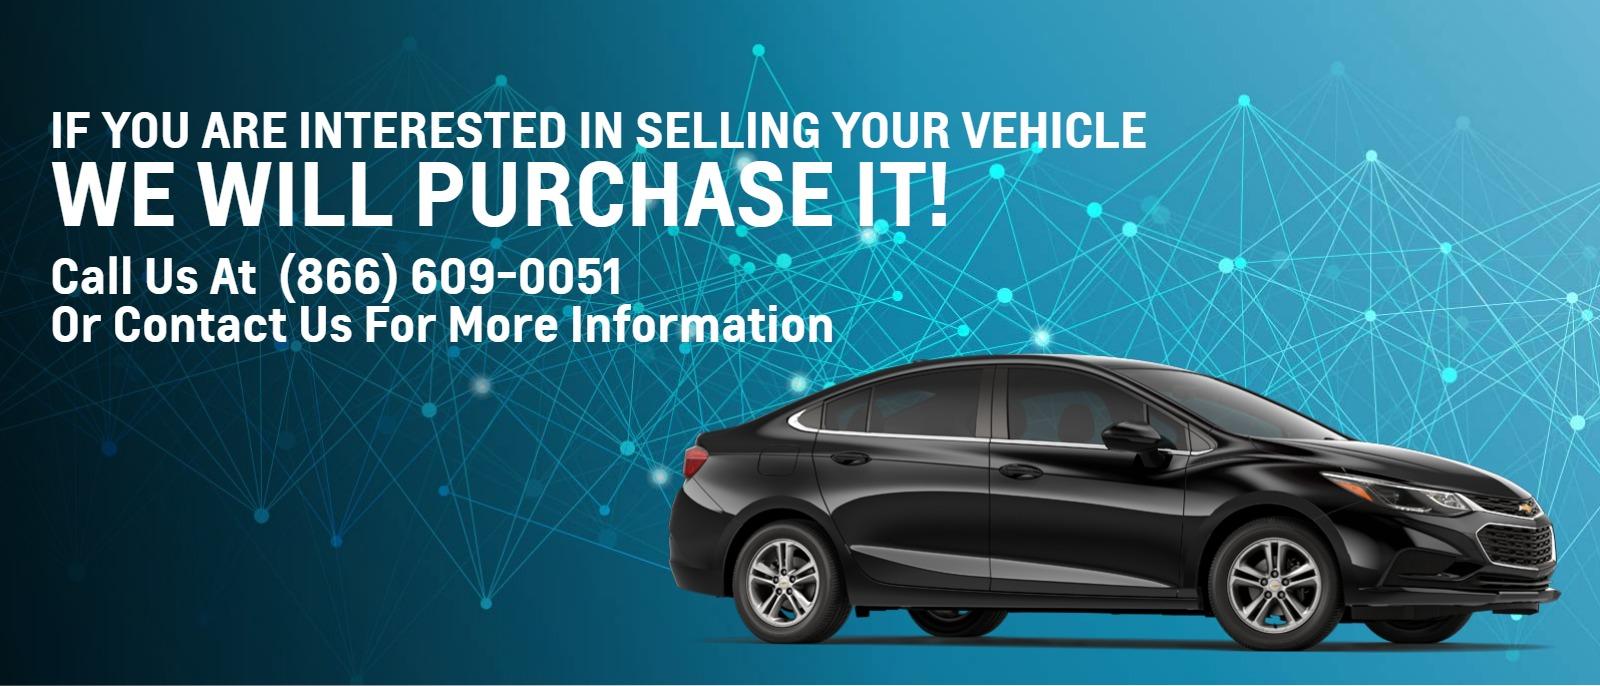 If you are interested in selling your vehicle we will purchase it!